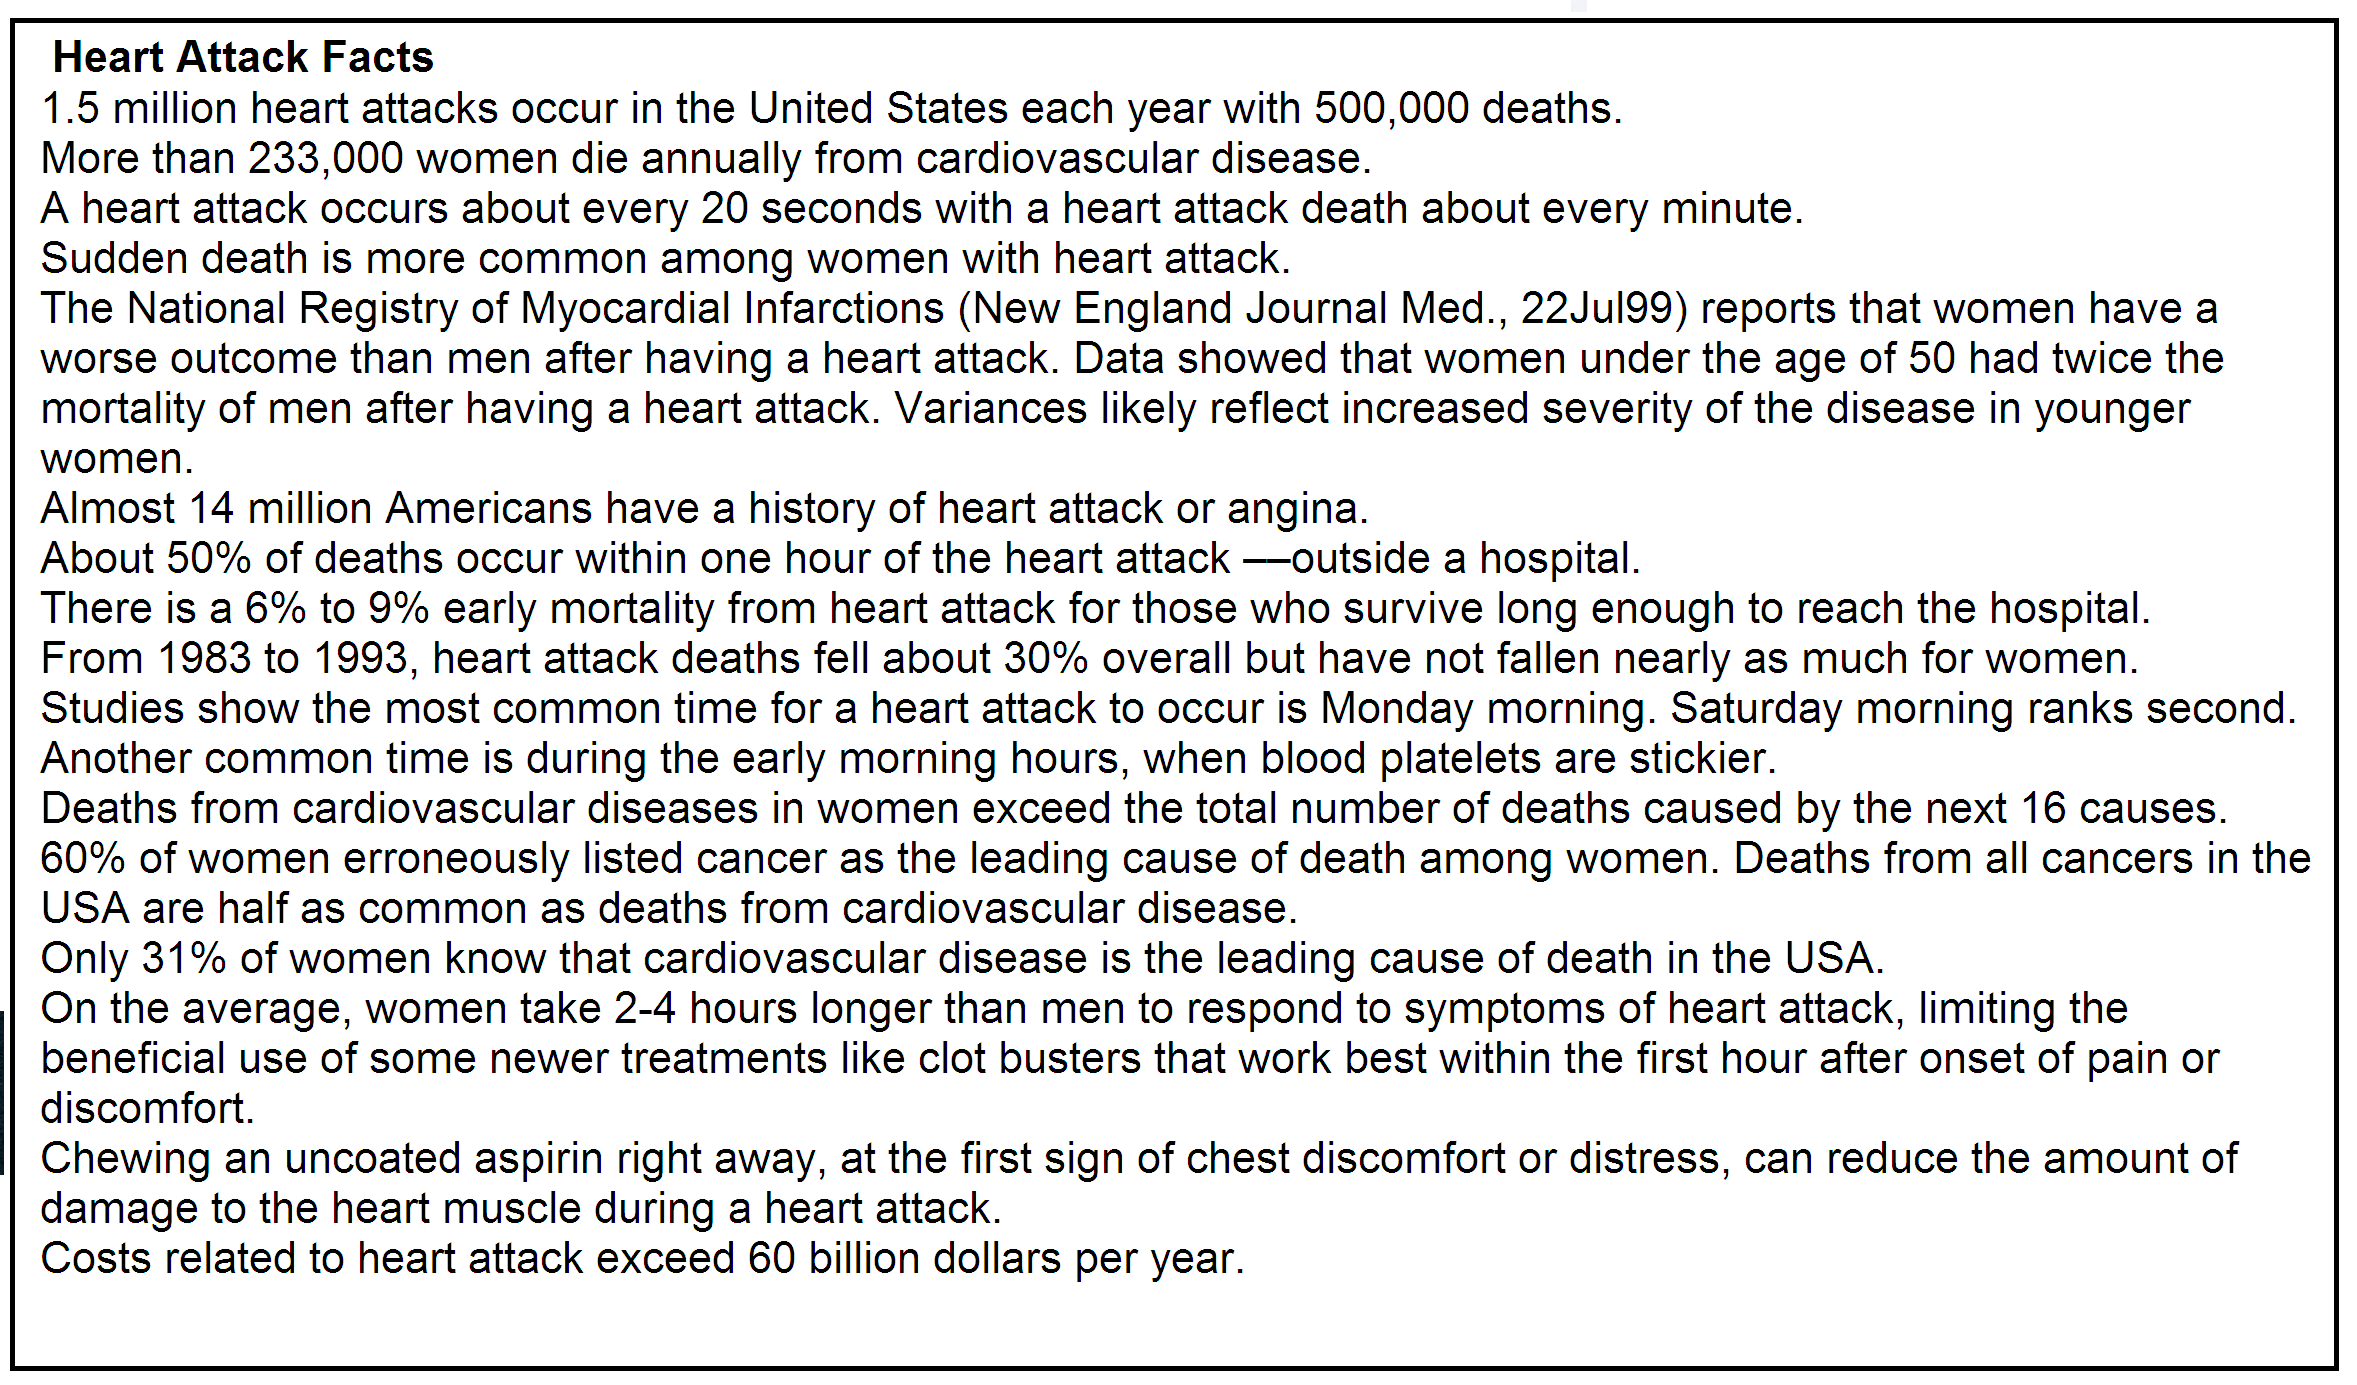 Heart Attack Facts